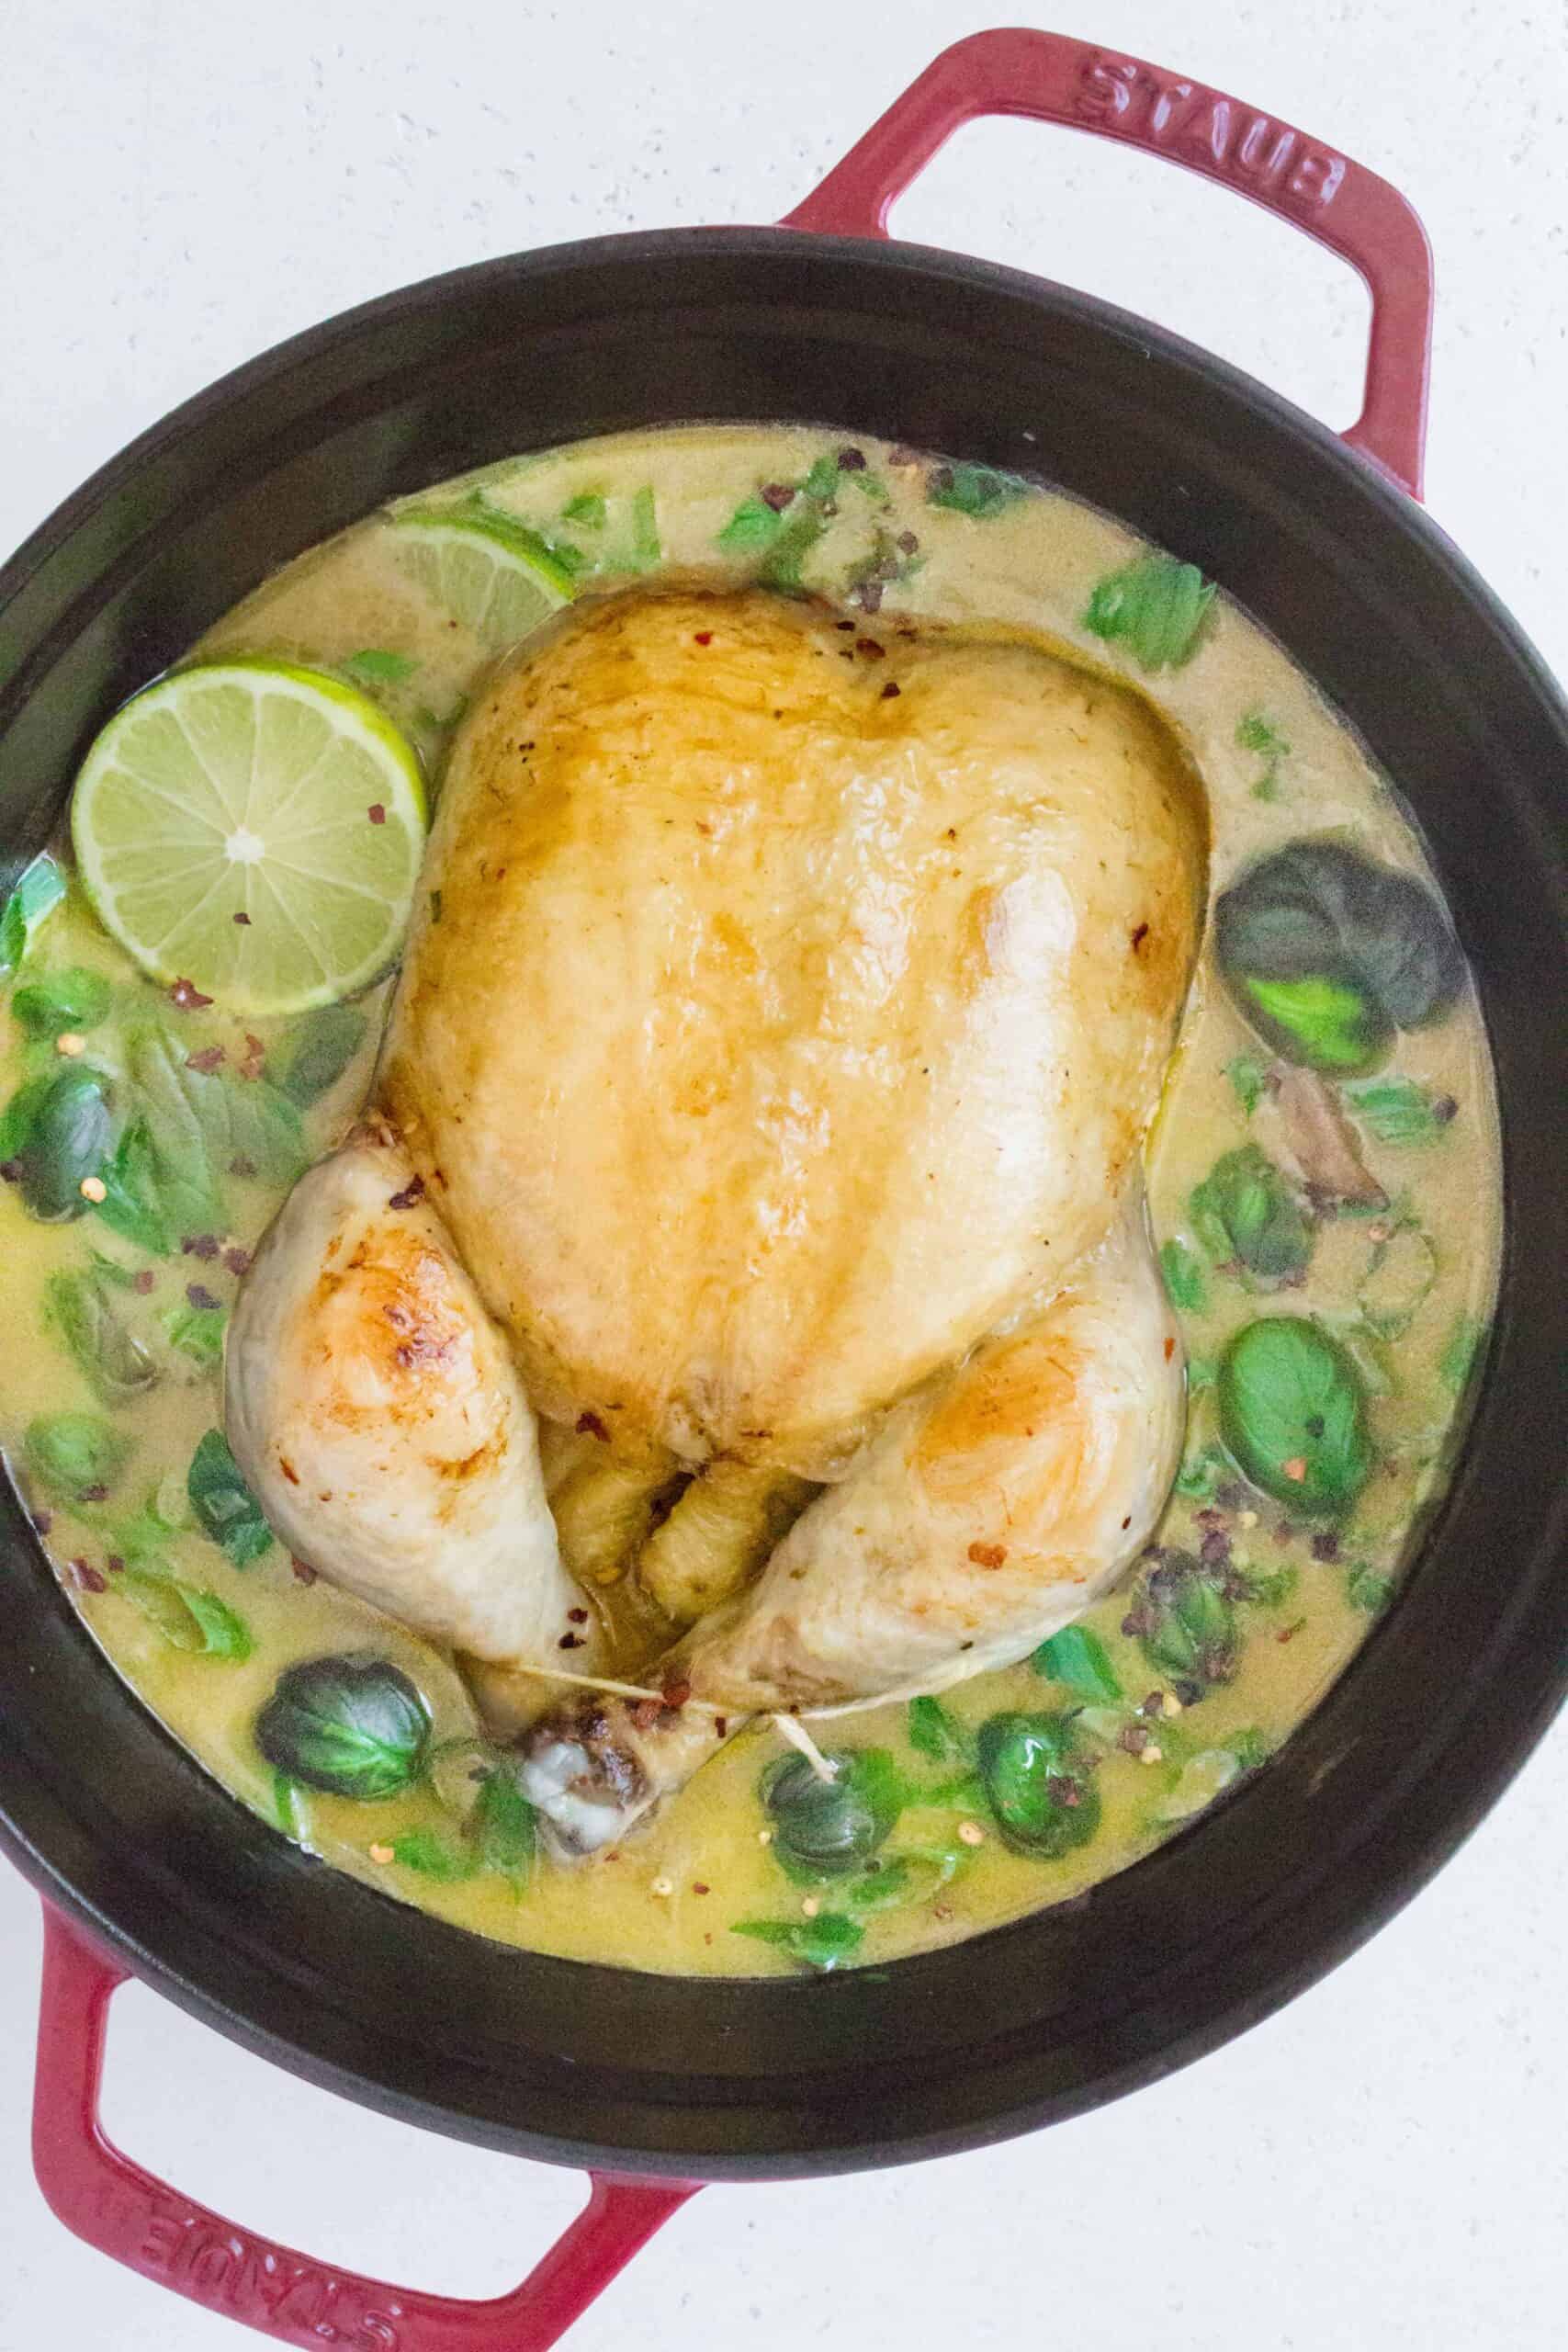 Creamy, spicy, and packed with flavour, you're going to want to give this melt-in-your-mouth Whole Thai Curry Chicken with Coconut Milk a try!